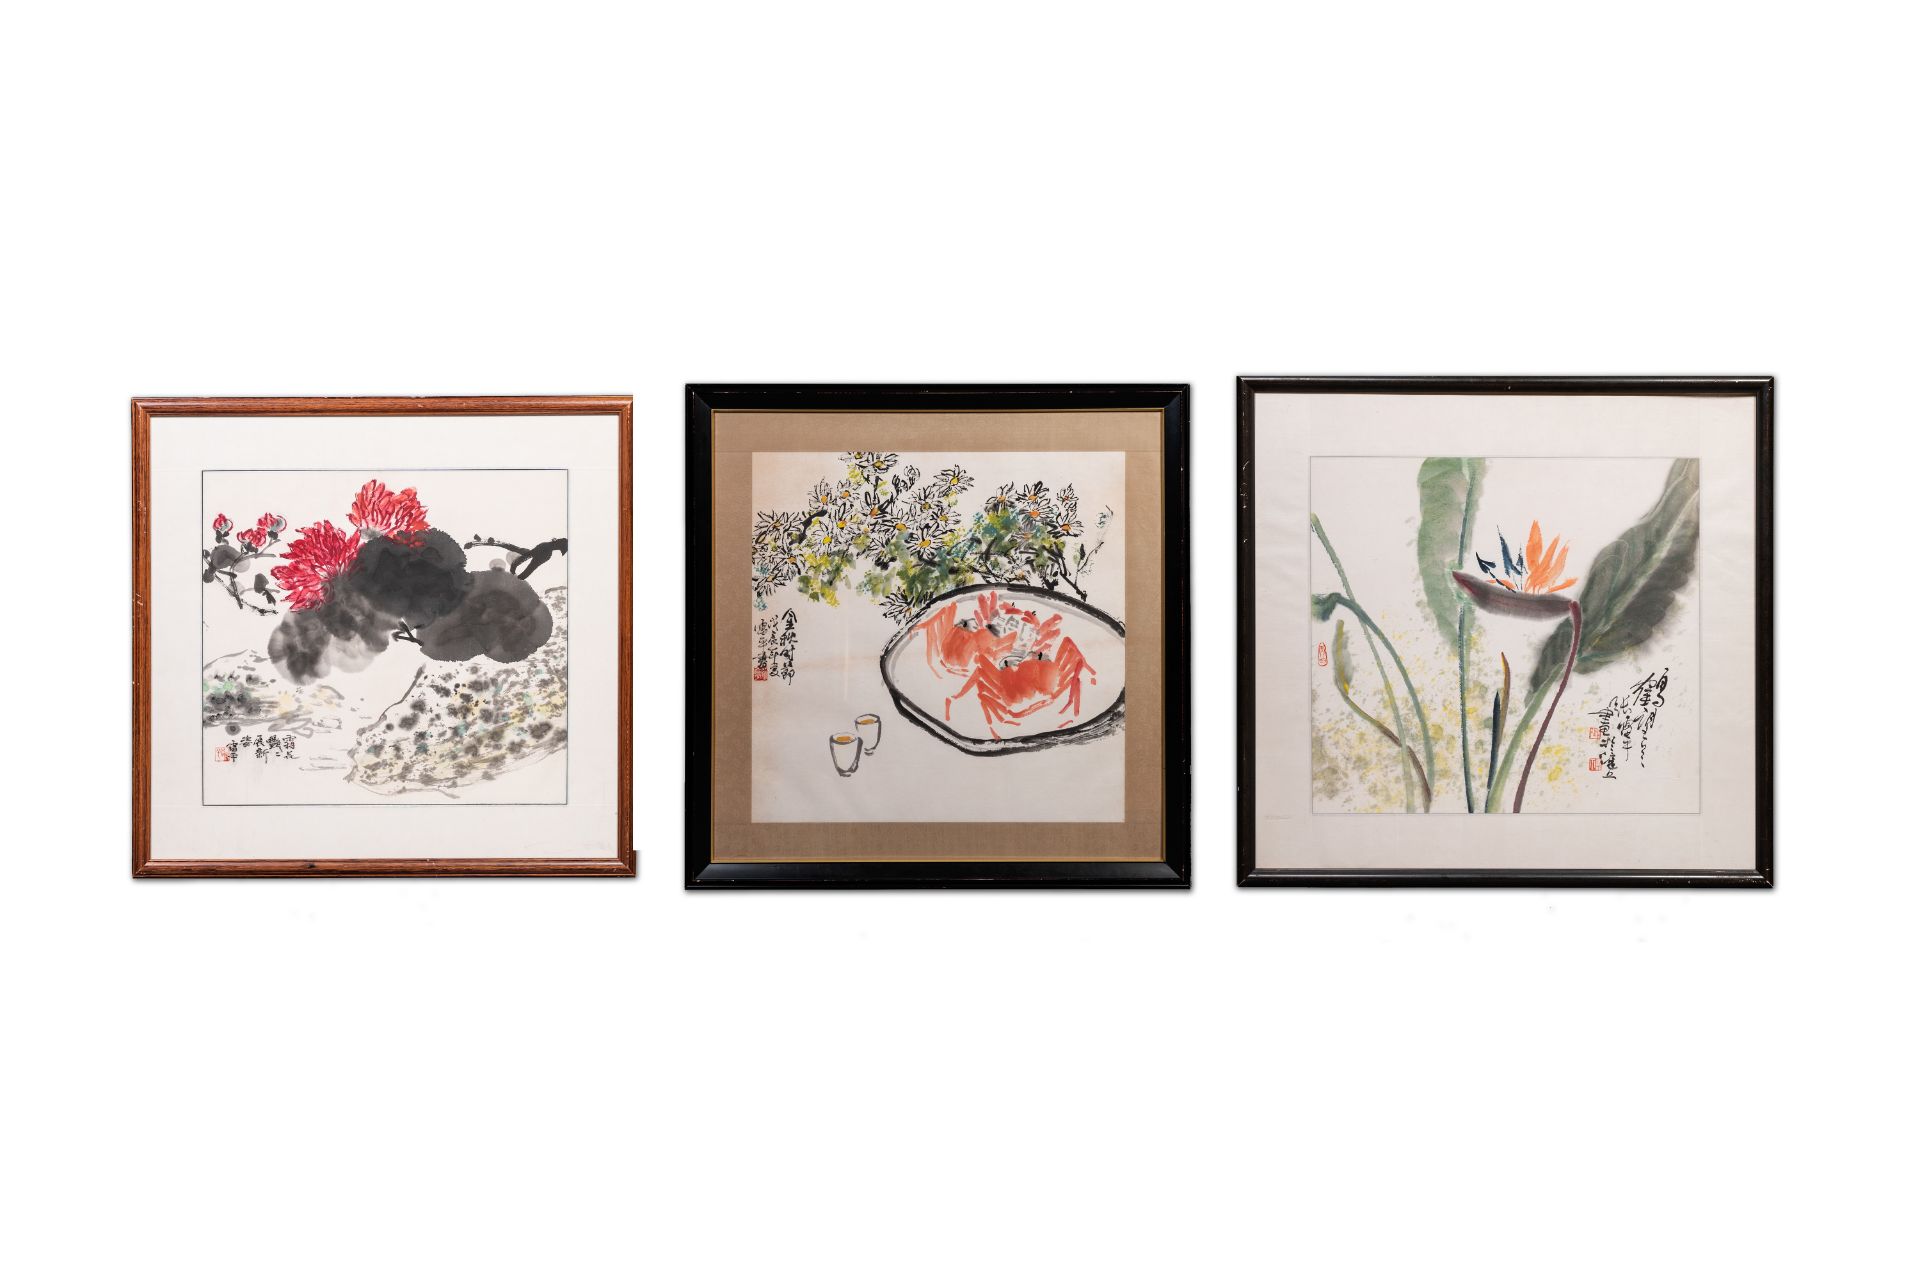 Zhang Leiping å¼µé›·å¹³ (1945): three various works, ink and color on paper, dated 1988